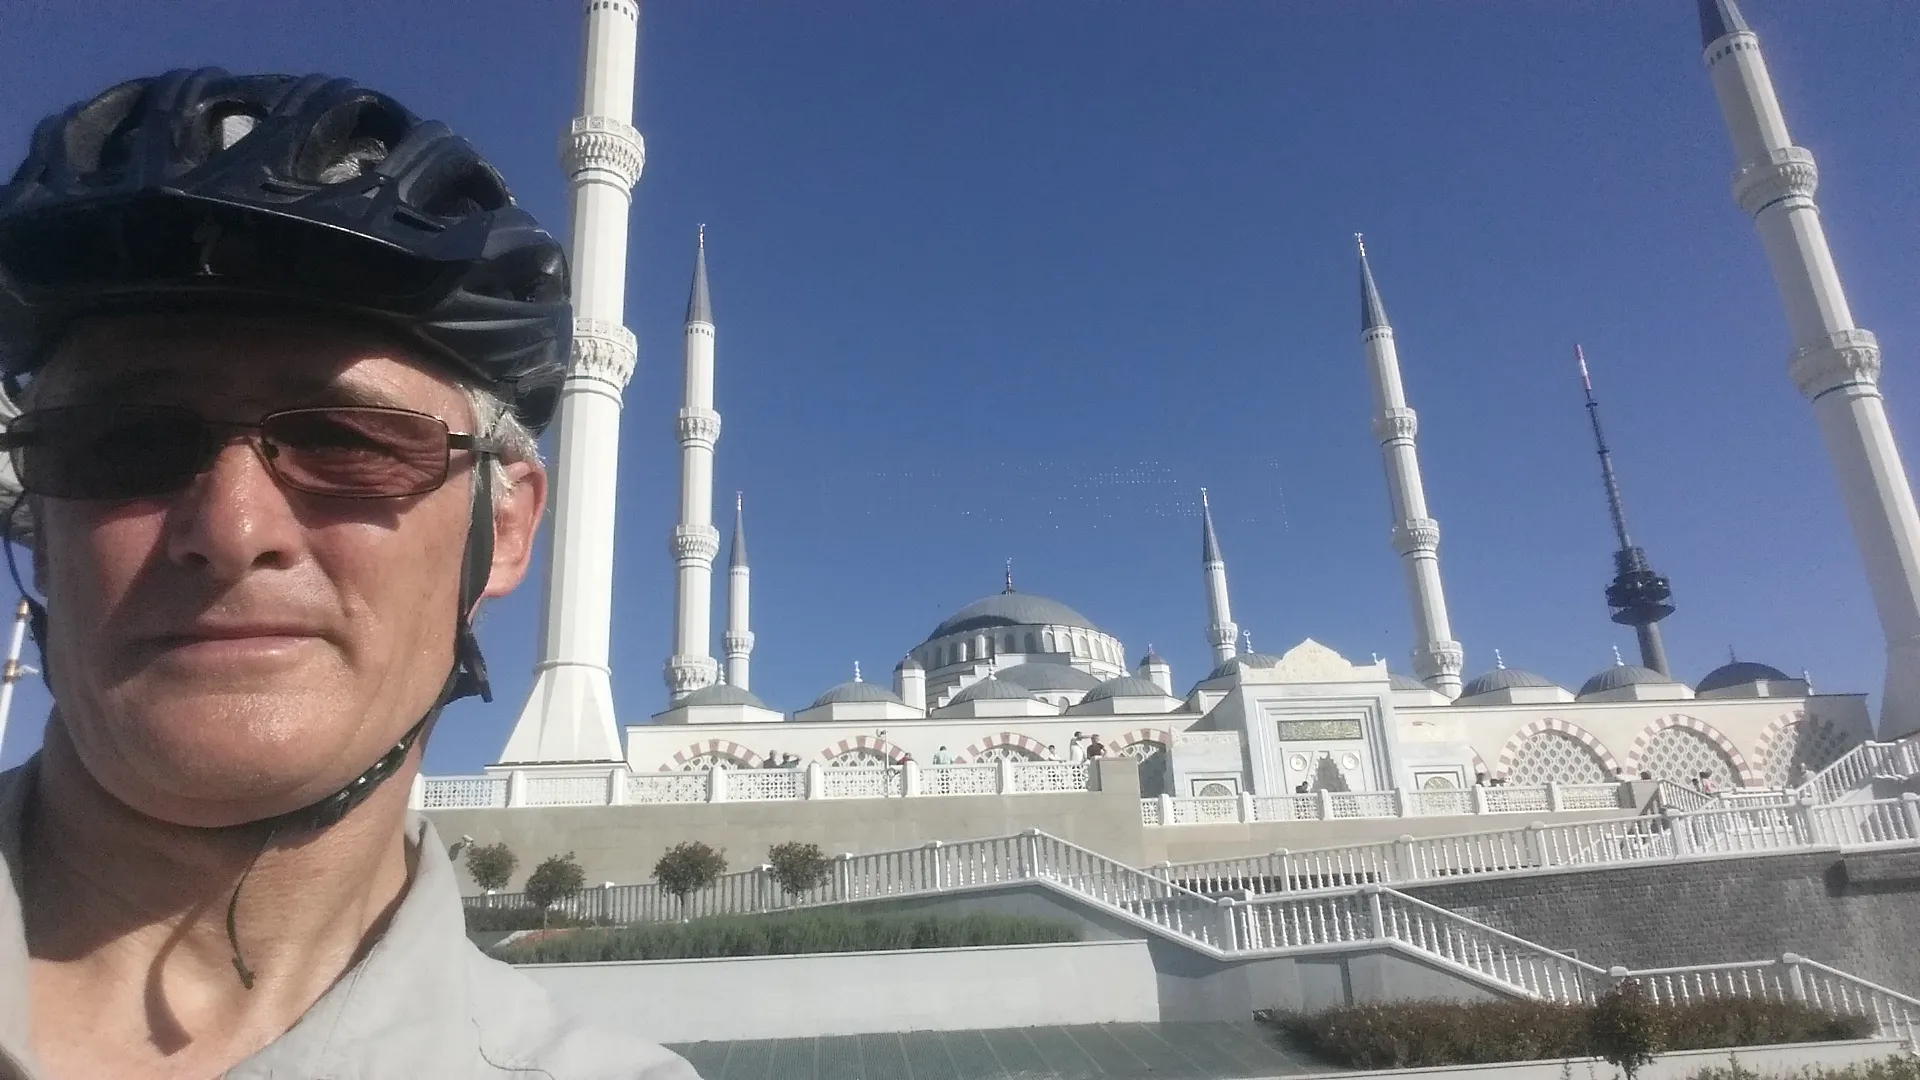 Dave in front of a Mosque